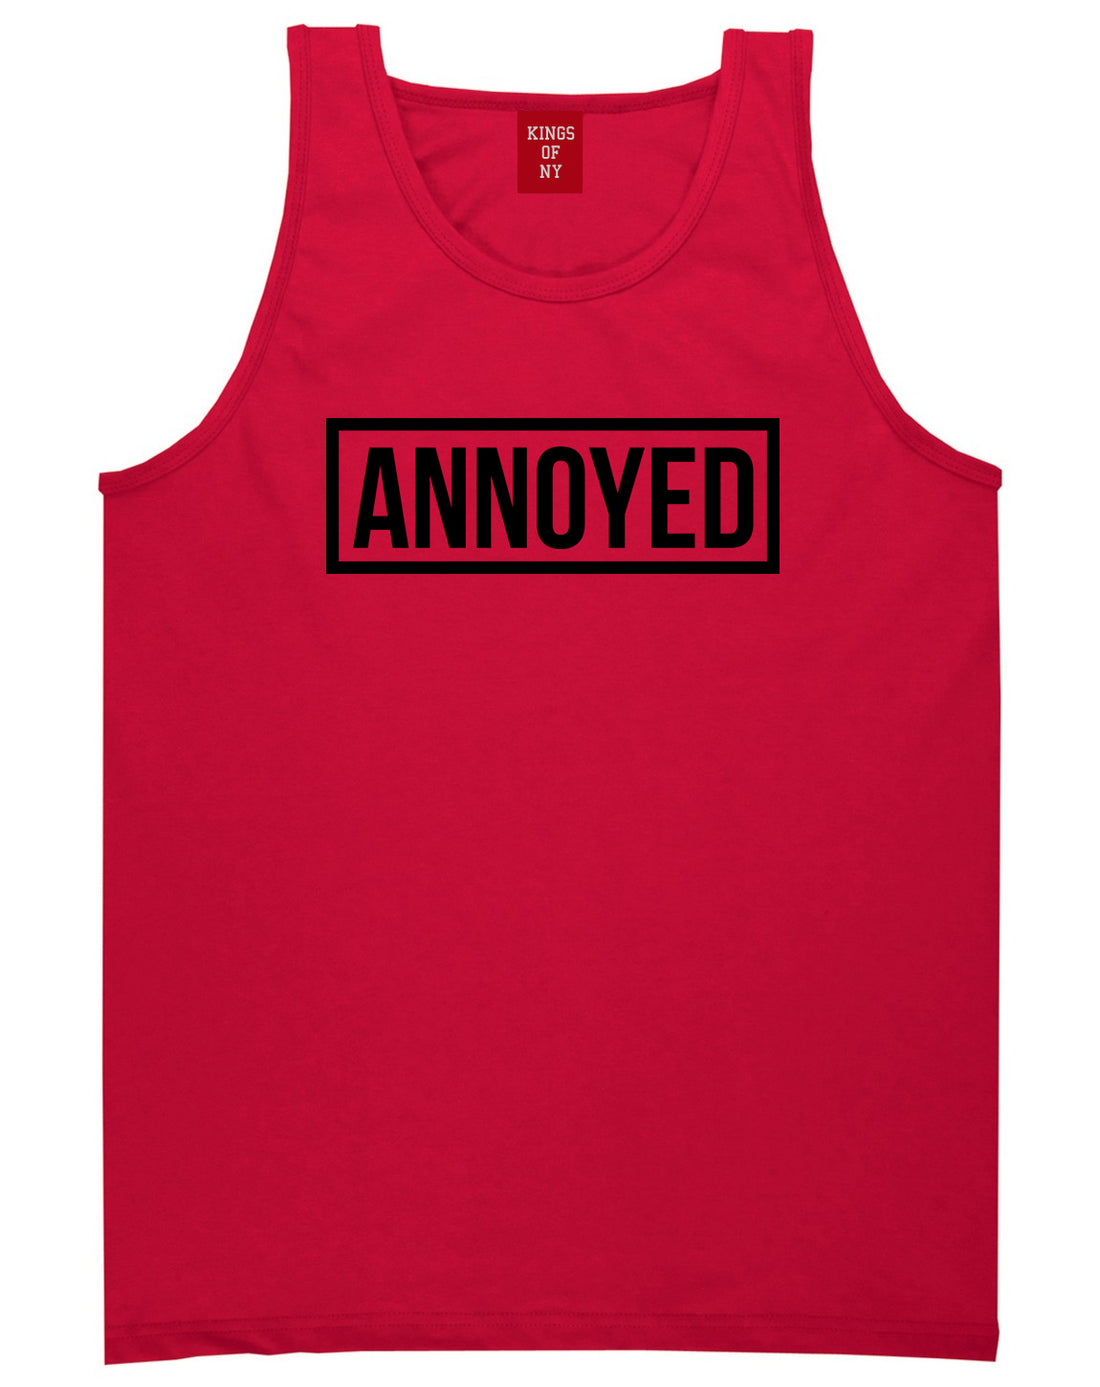 Annoyed Red Tank Top Shirt by Kings Of NY